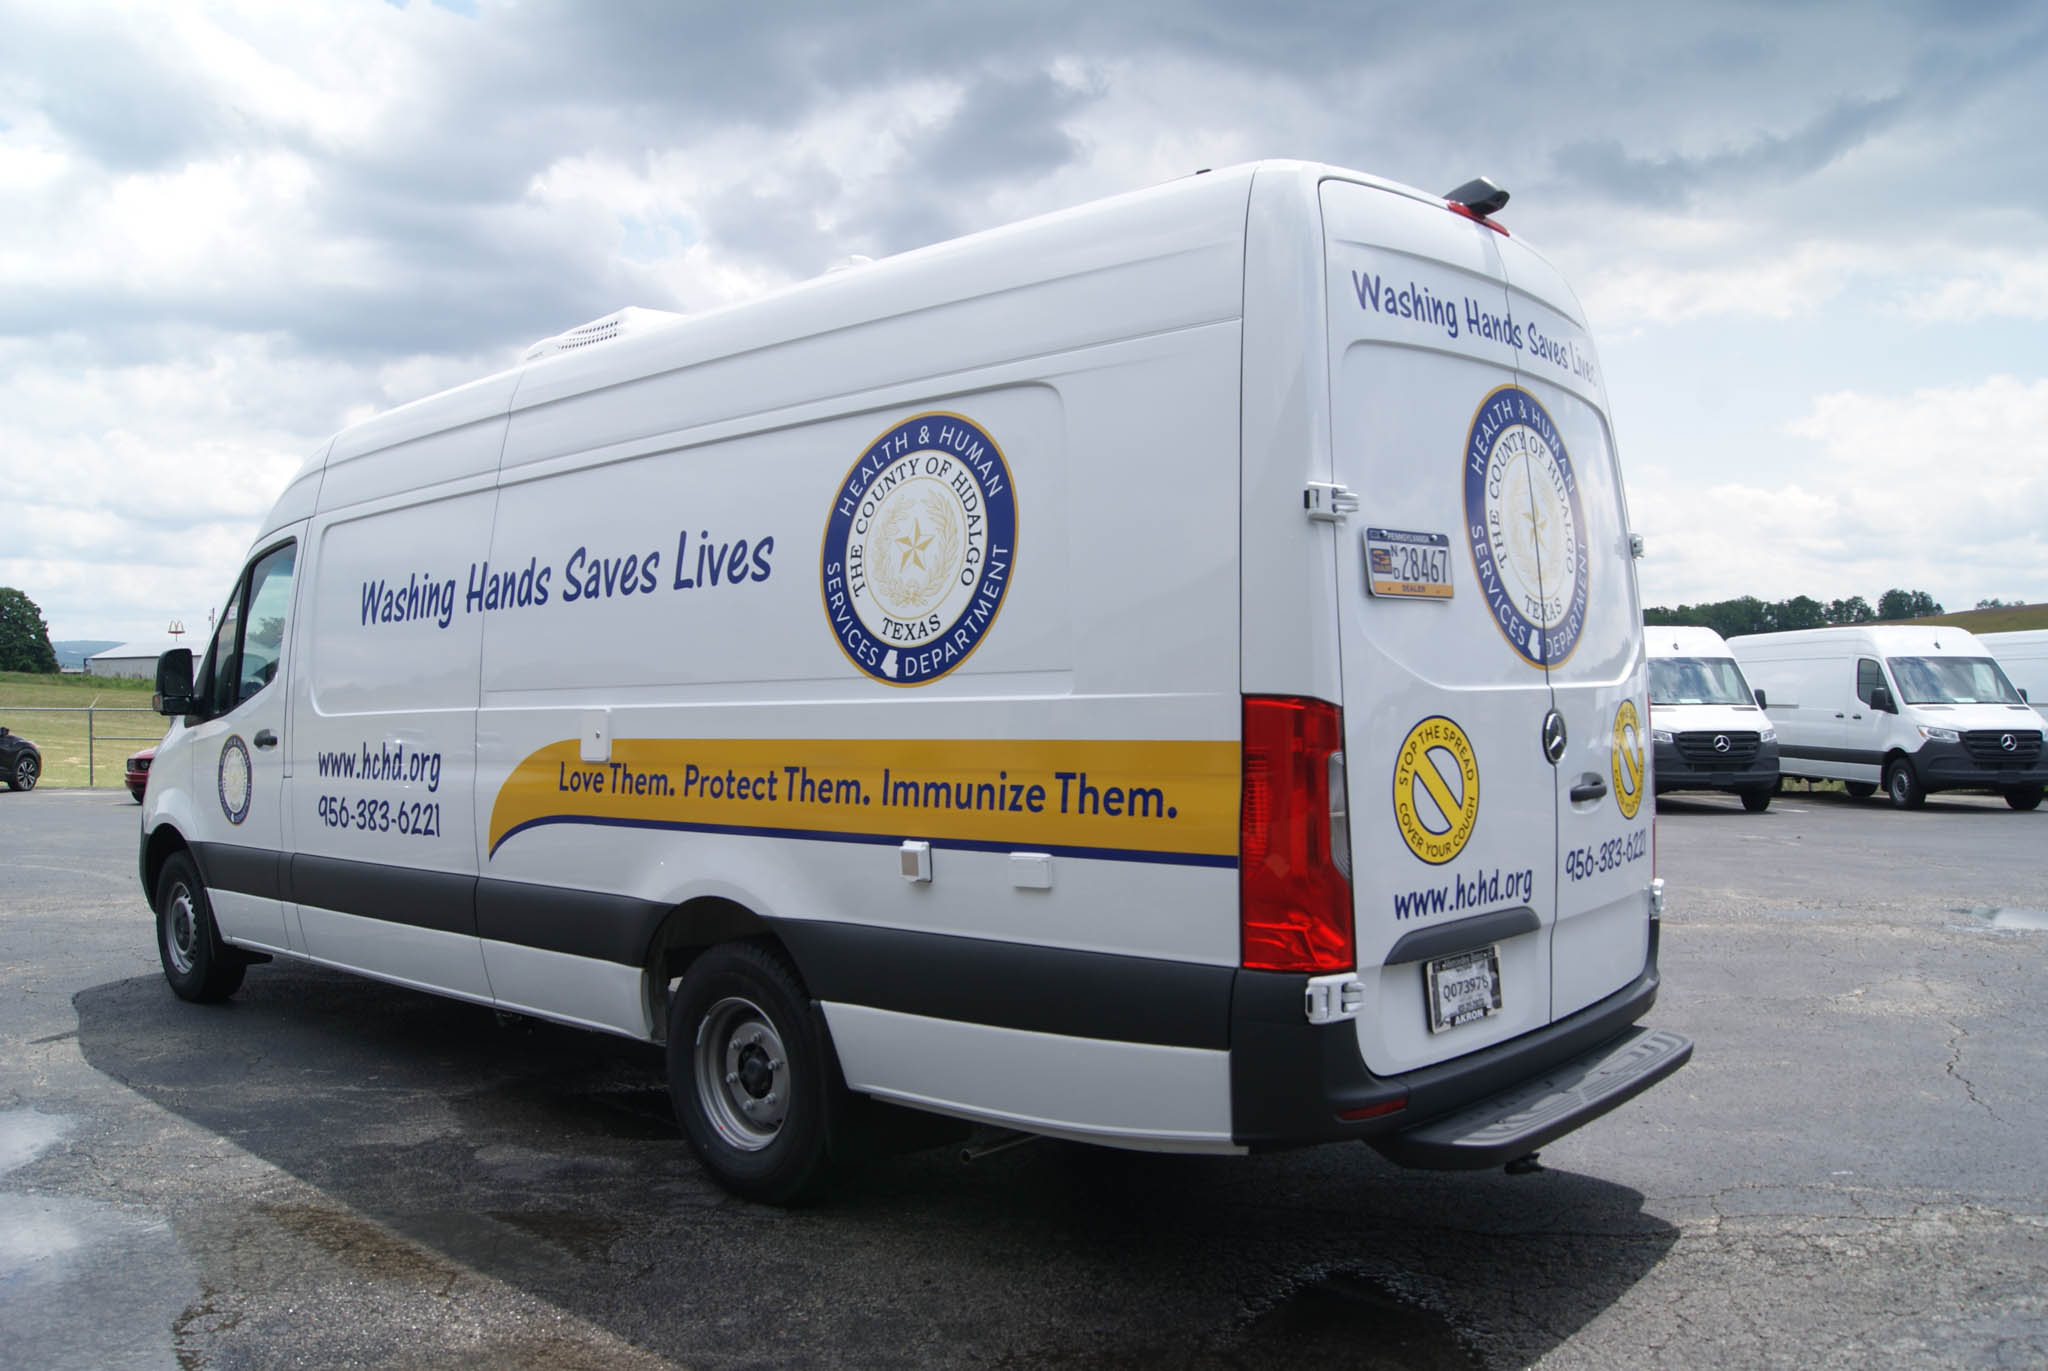 An angled view of the Mobile Medical Exam sprinter's rear decals.